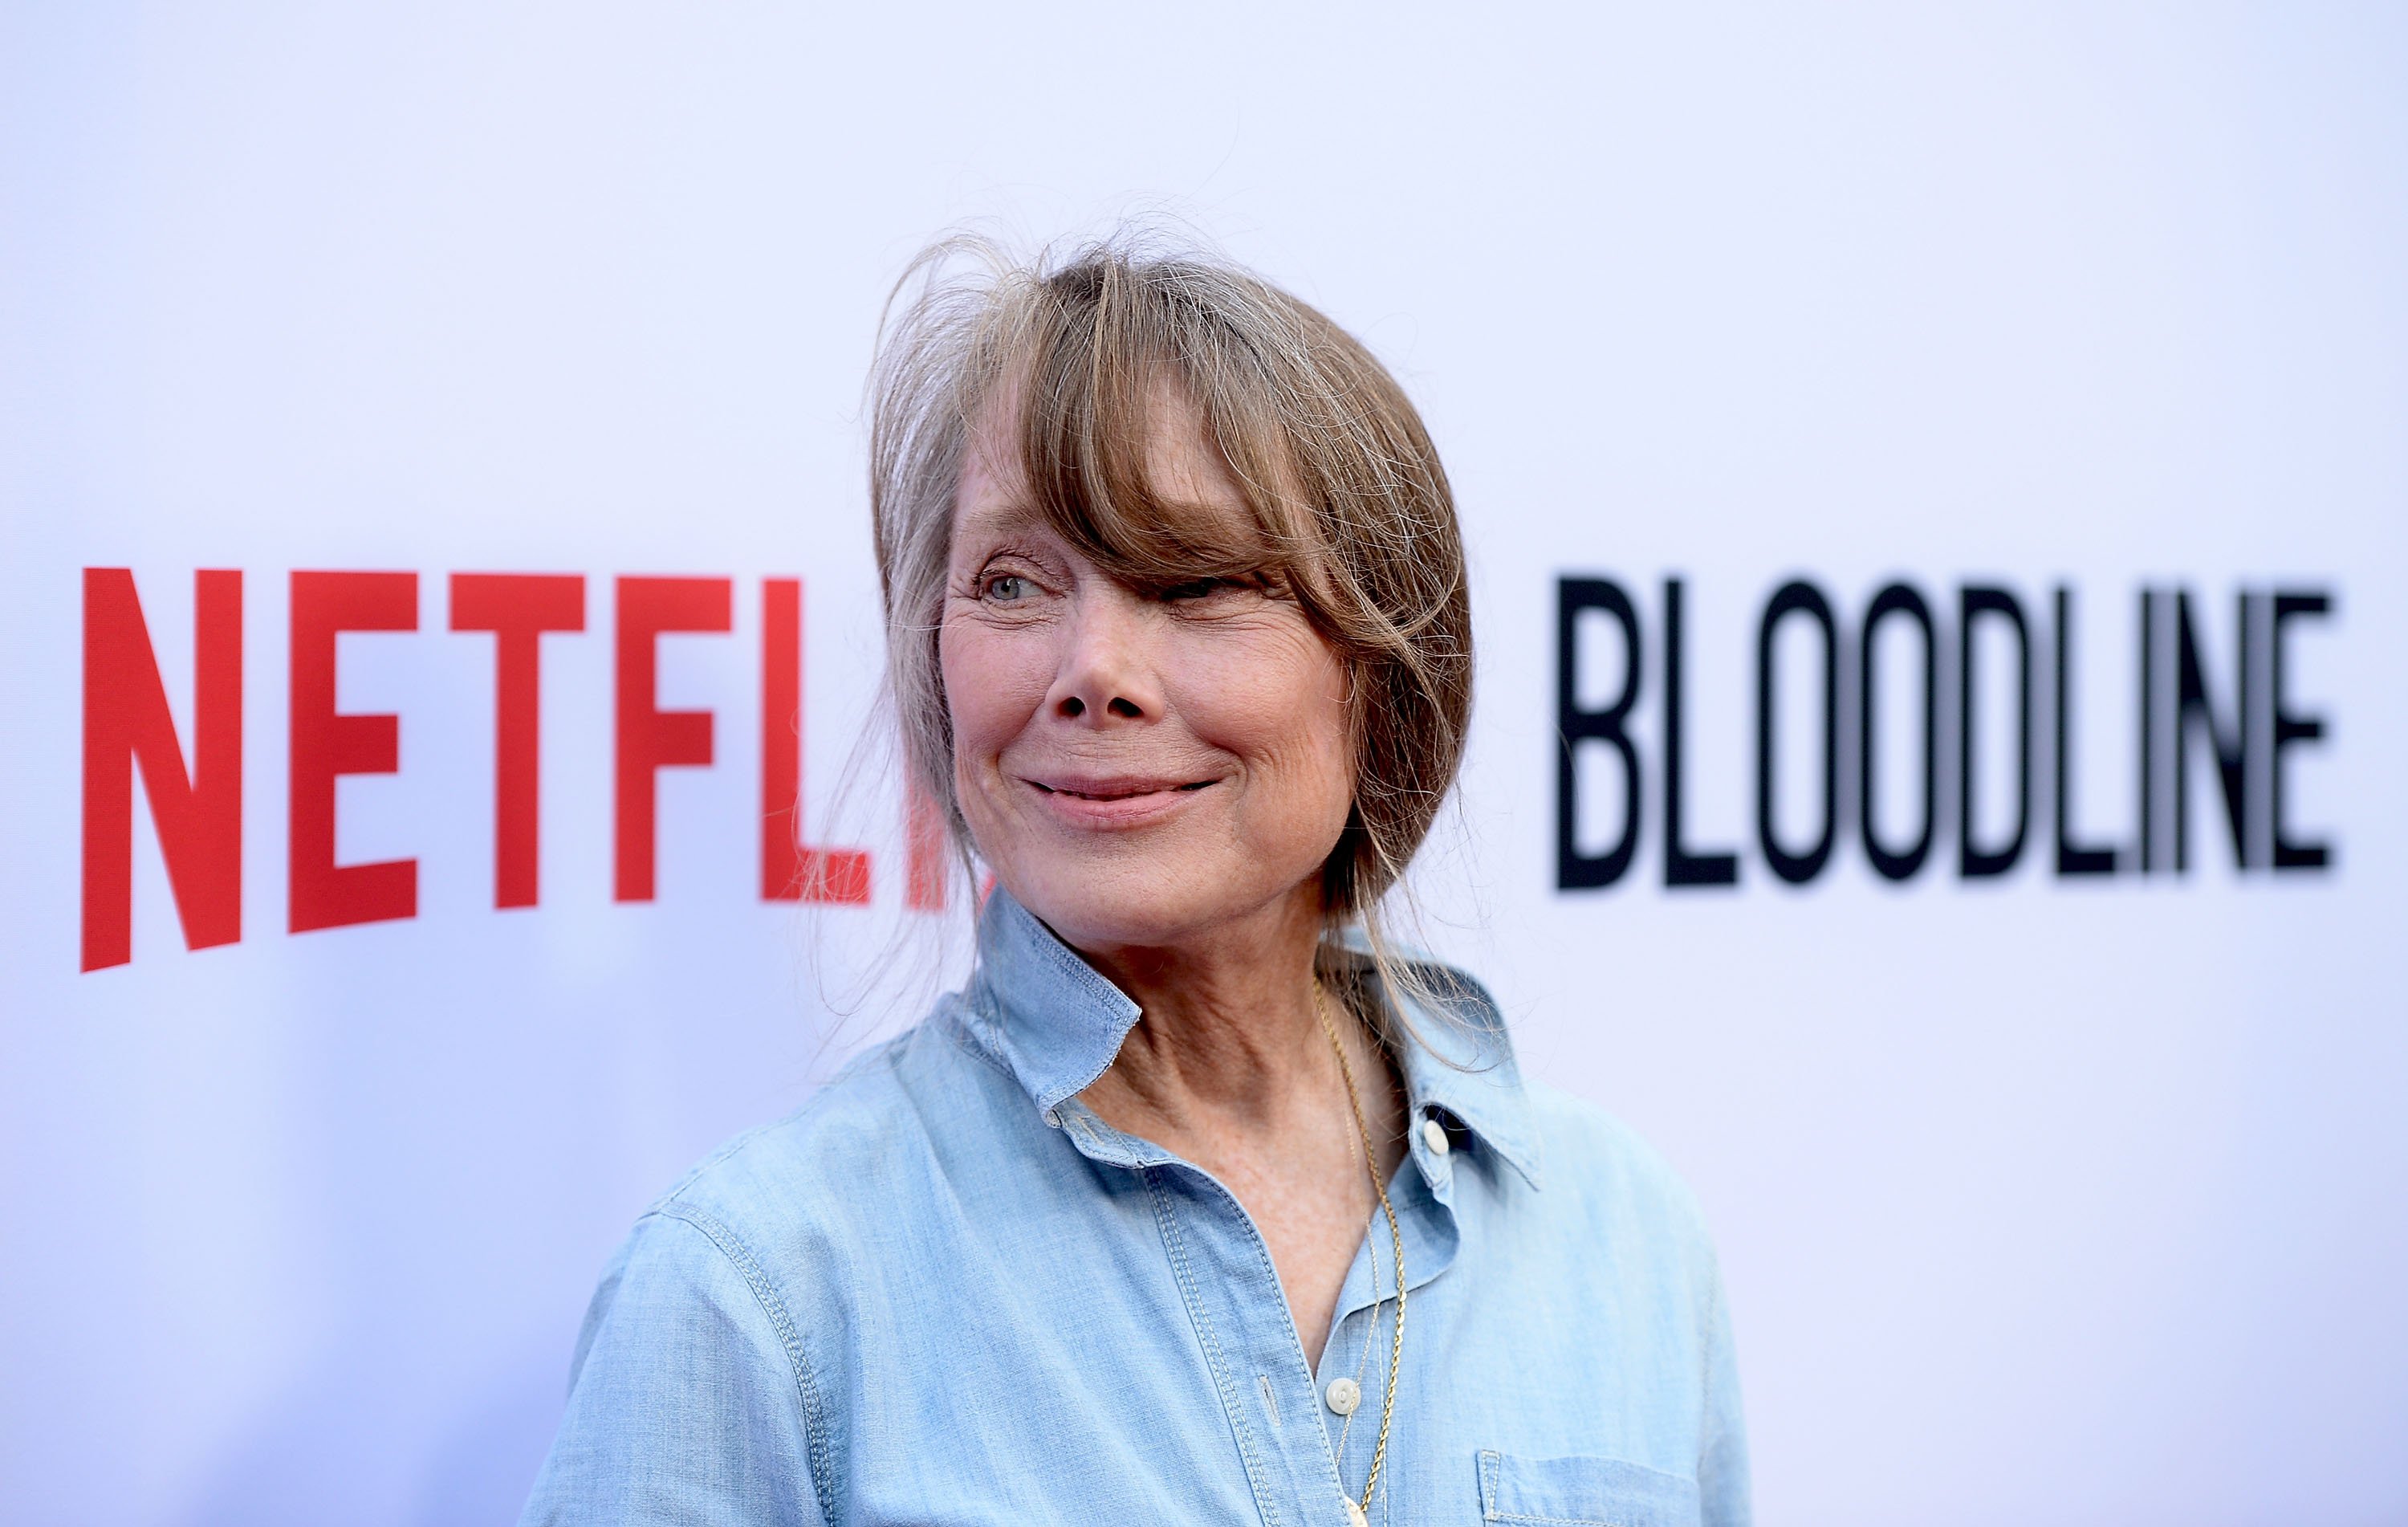 Sissy Spacek at the premiere of Netflix's "Bloodline" Season 3 on May 24, 2017 | Photo: Getty Images